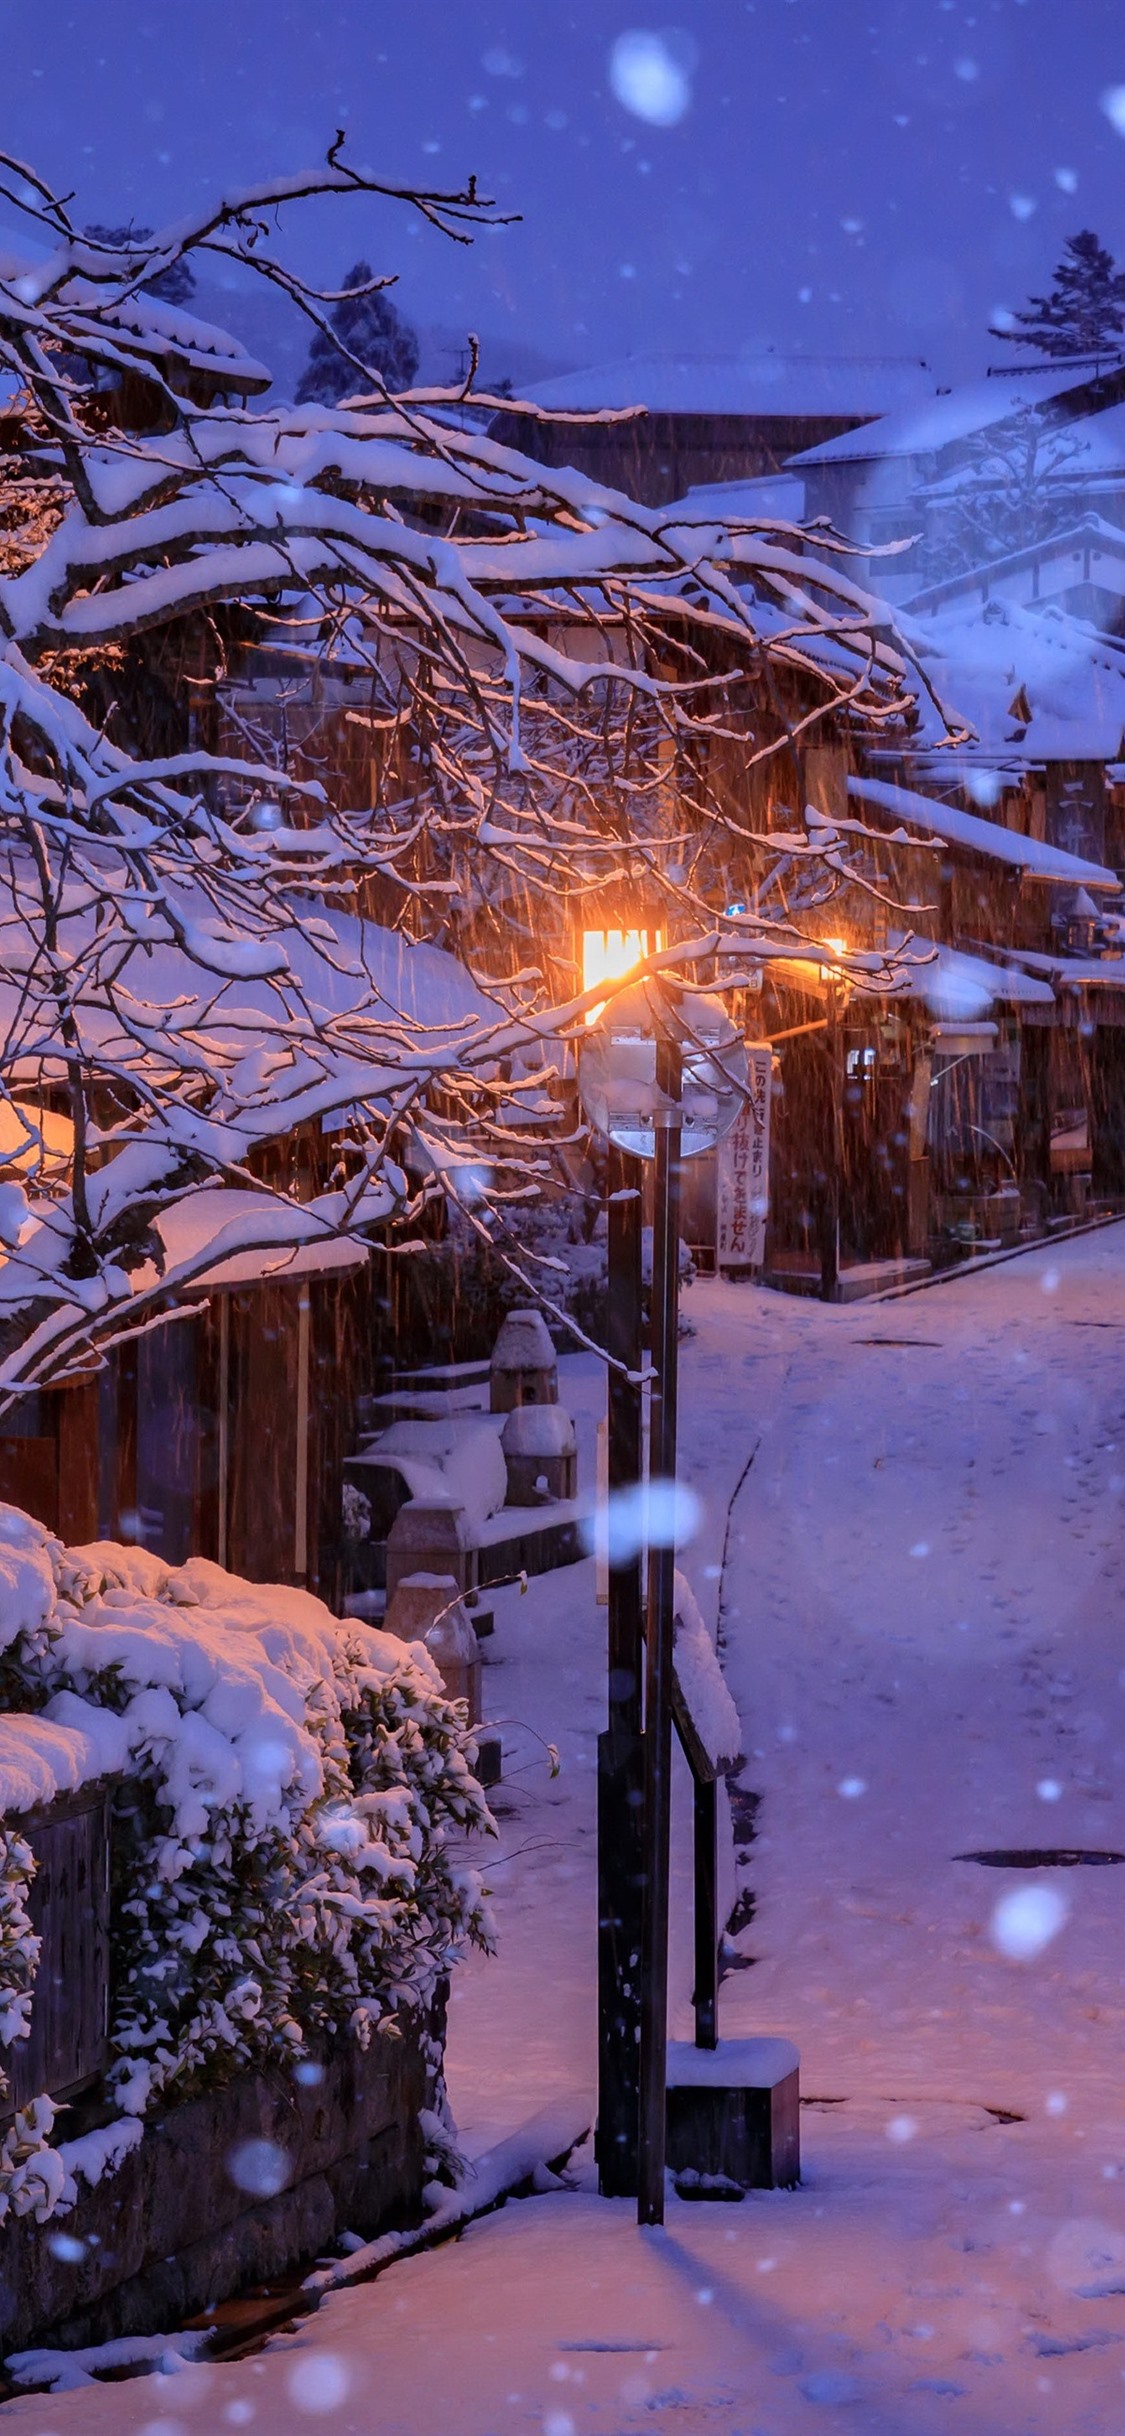 Iphone Wallpaper Japan, Kyoto, Houses, Snow, Trees, - Kyoto Wallpaper 4k - HD Wallpaper 